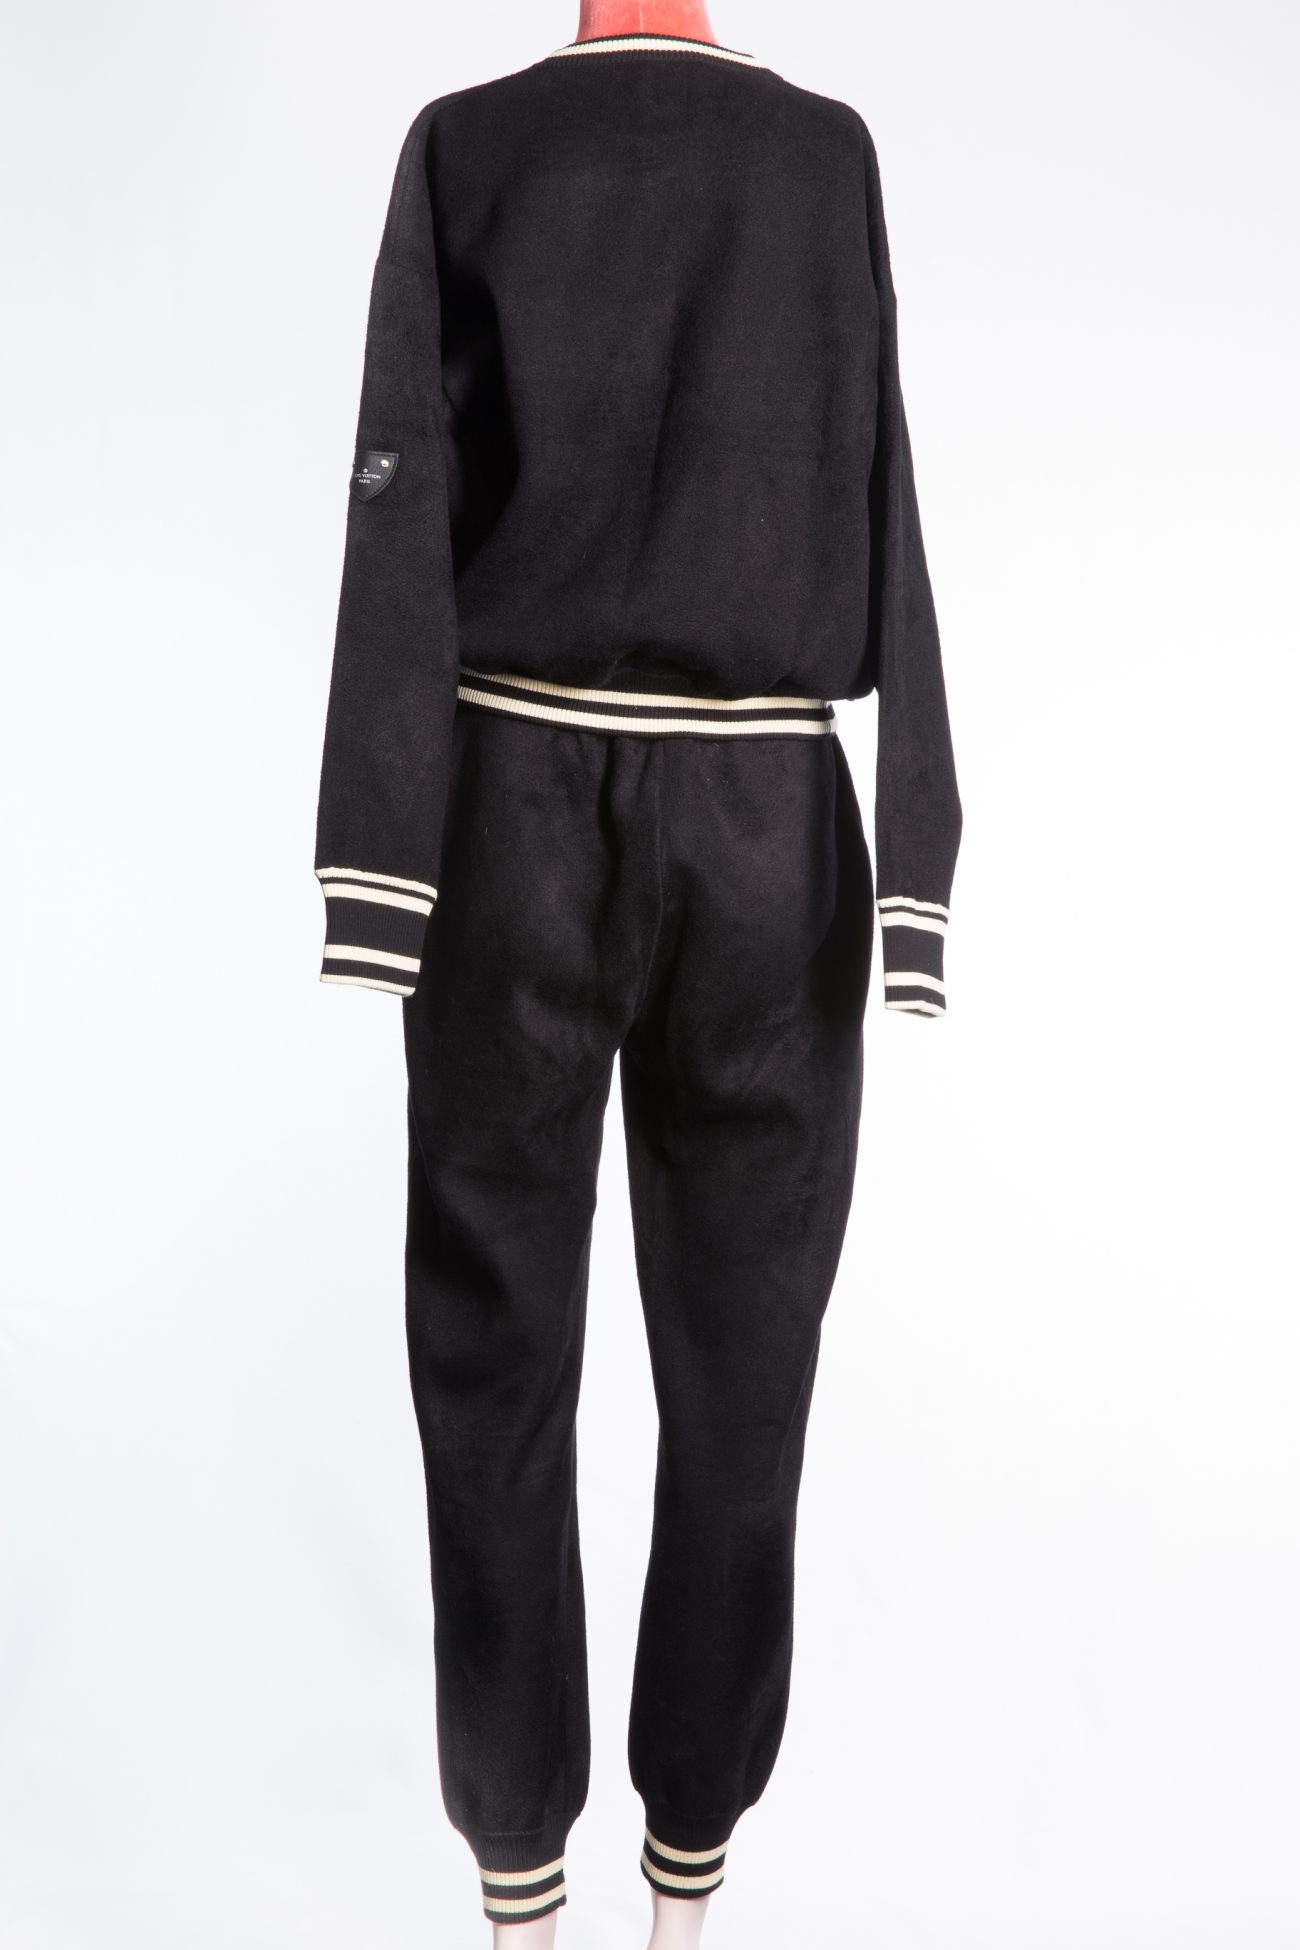 Louis Vuitton sweatpants and hoodie